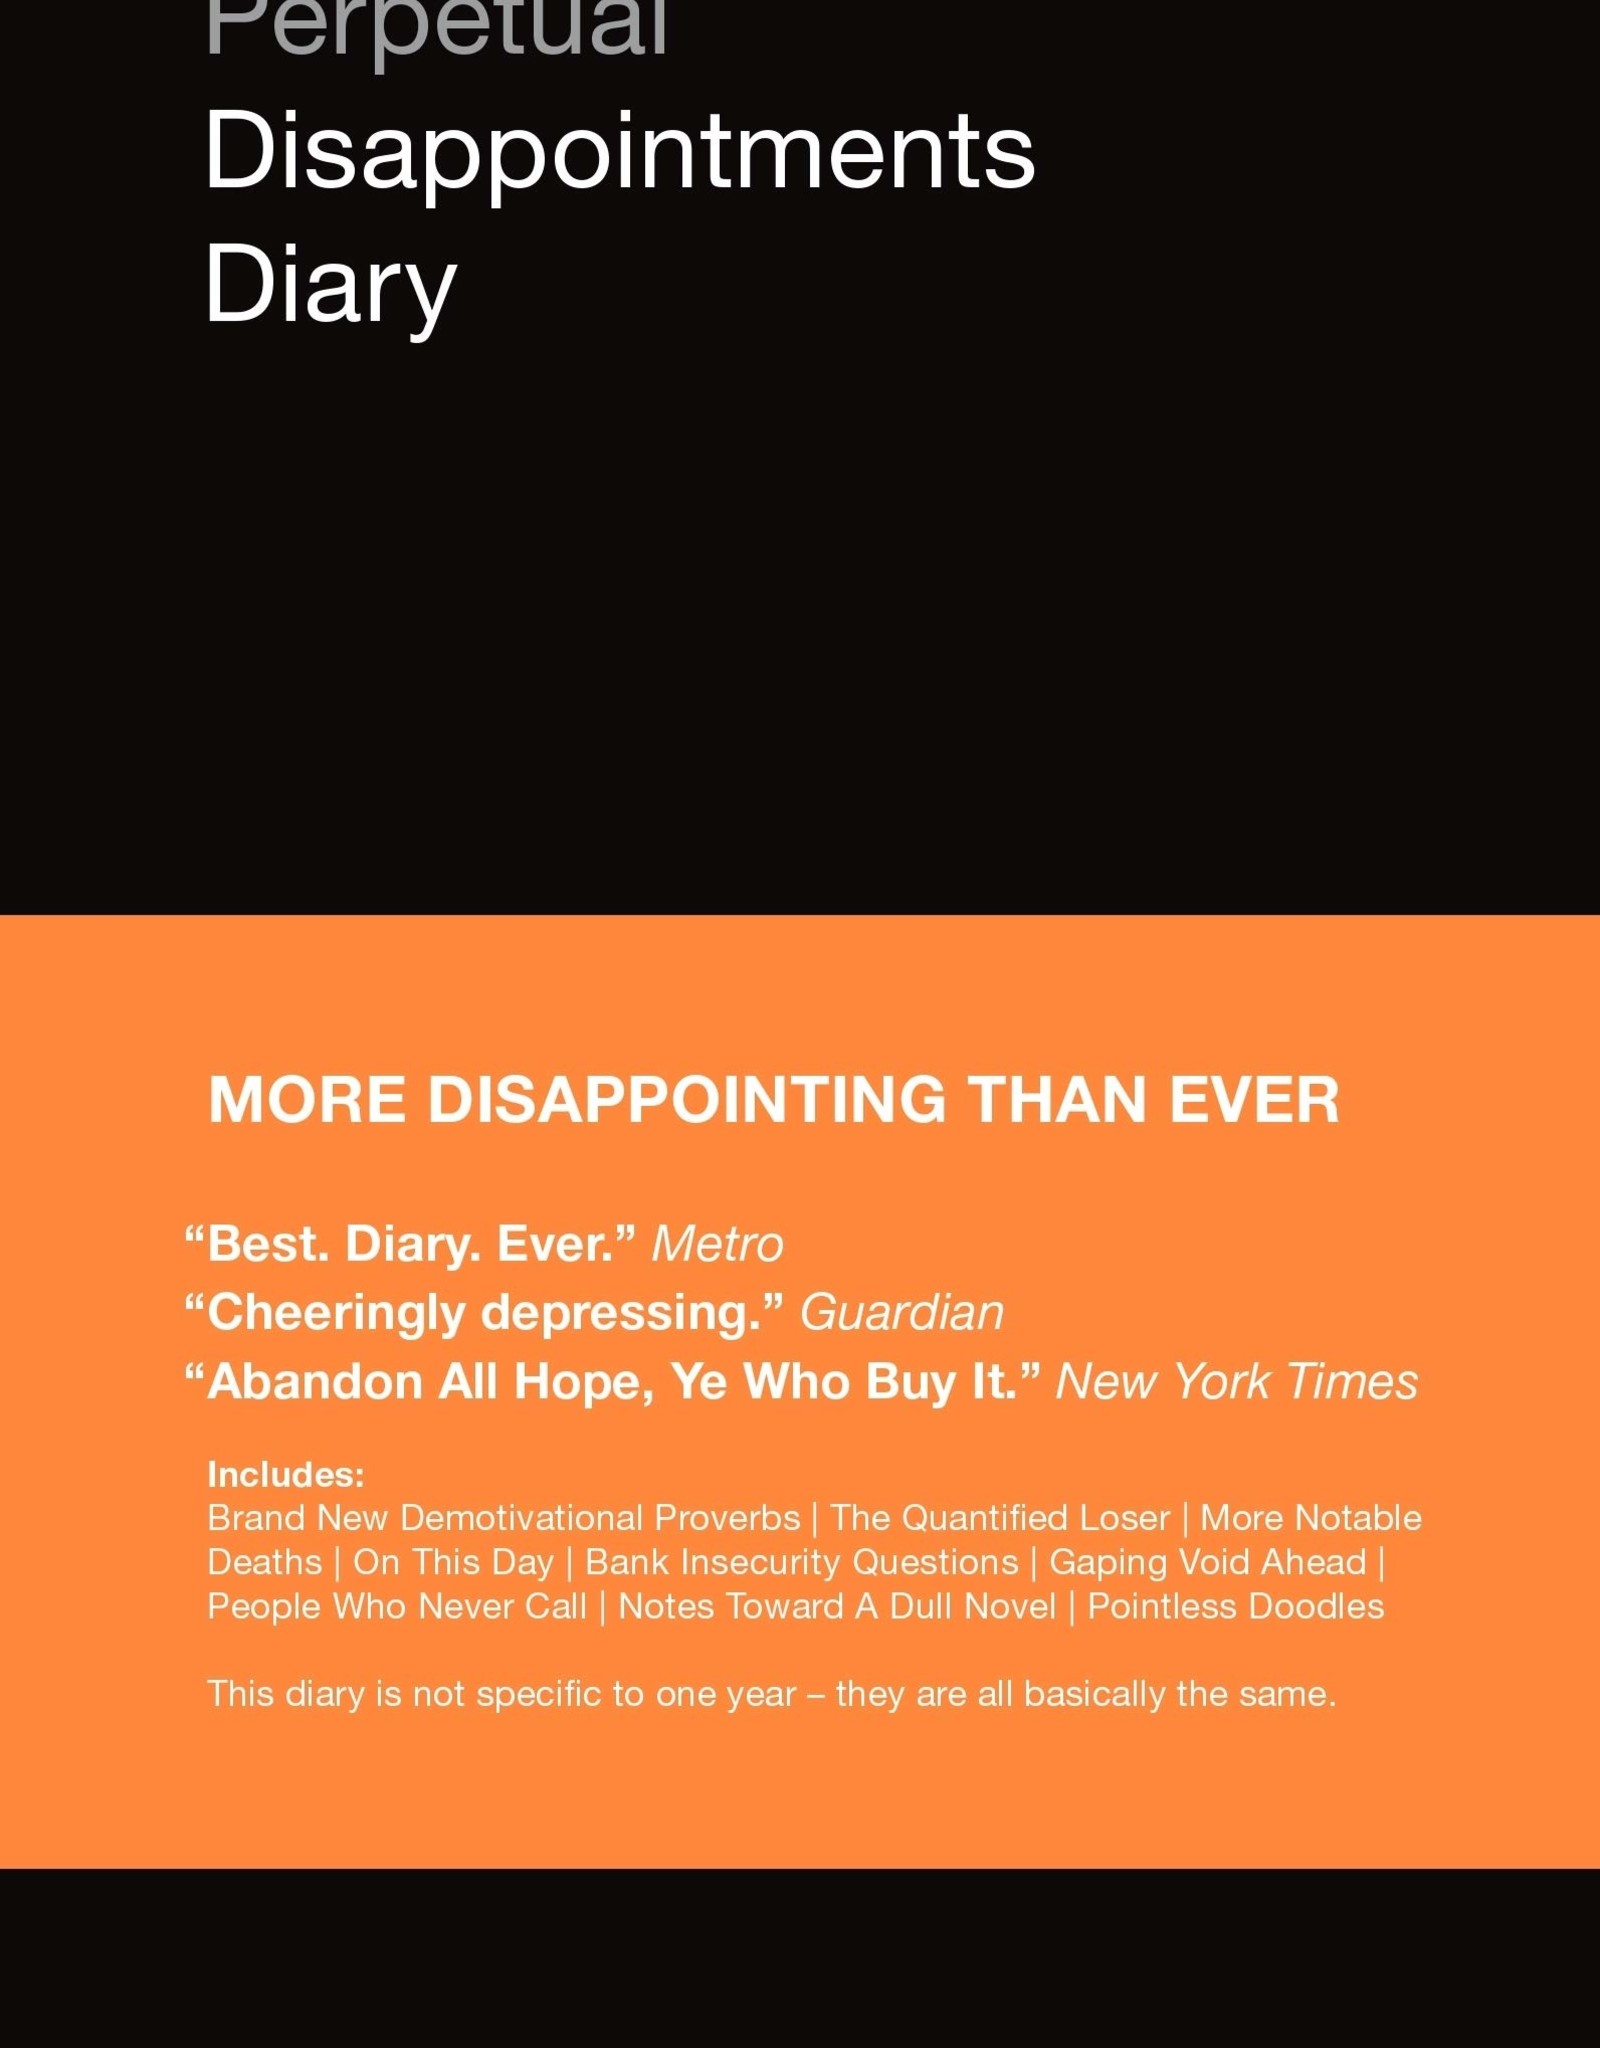 PERPETUAL DISAPPOINTMENTS DIARY (BLACK / ORANGE)